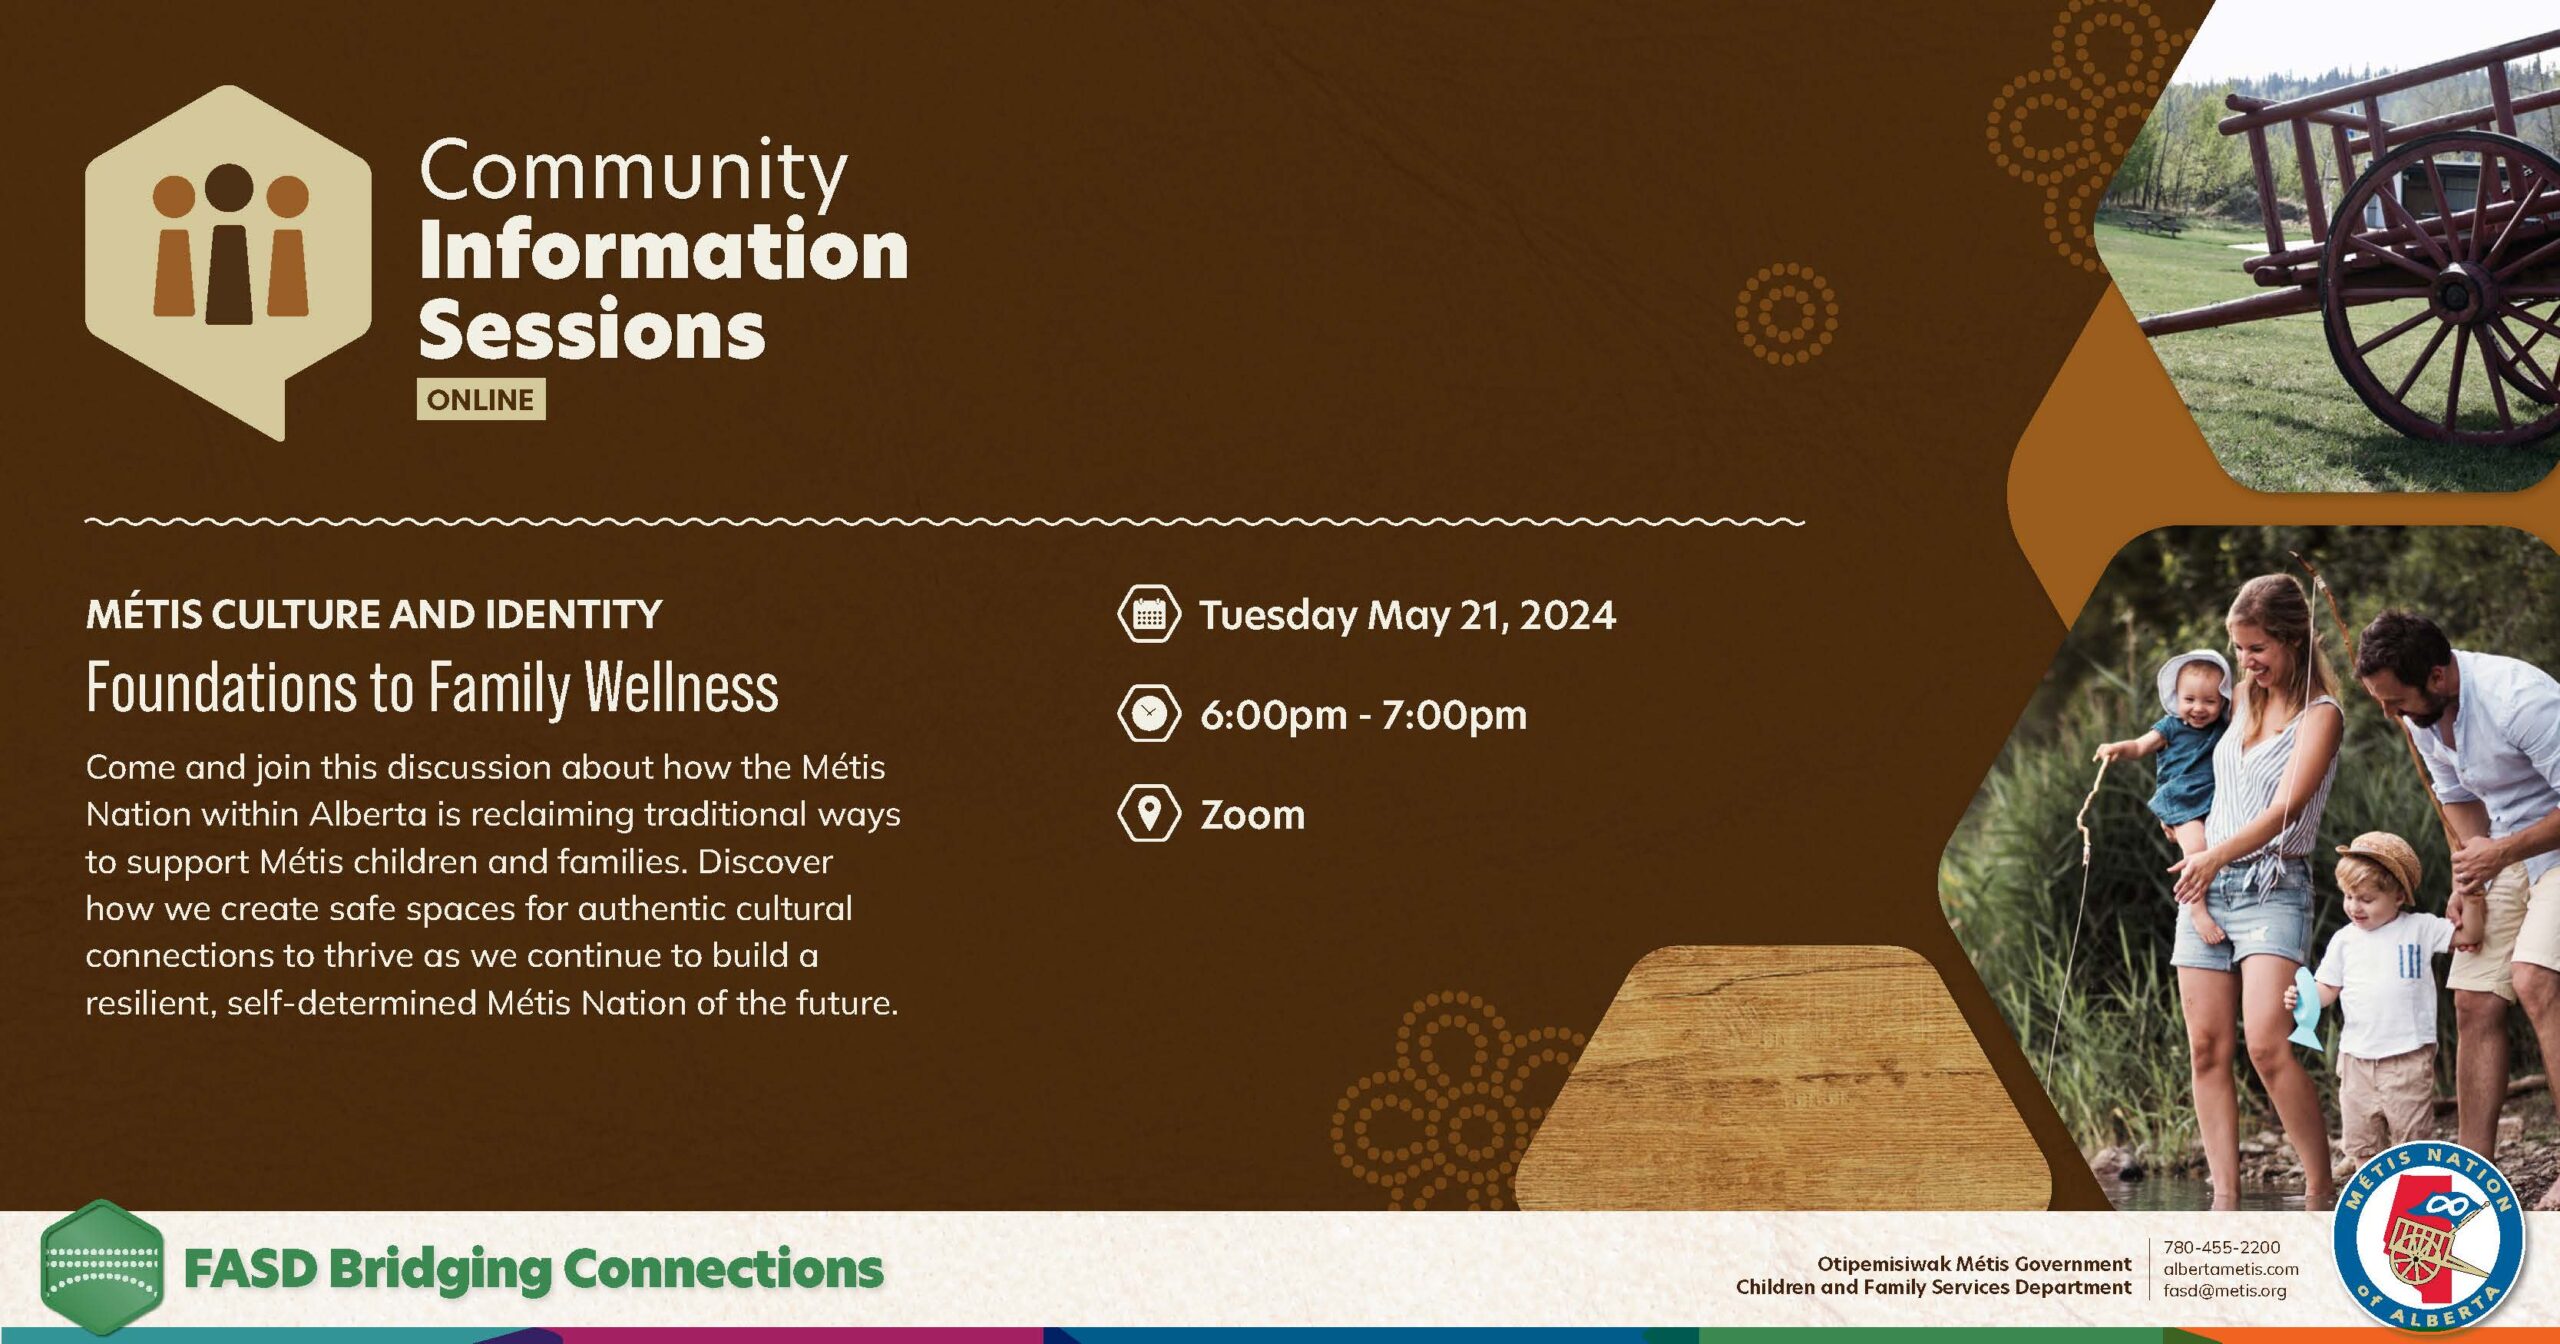 Community Information Sessions. Online. Metis Culture and Identity. Foundations to Family Wellness. Tuesday, May 21 from 6 p.m. to 7 p.m. on Zoom.